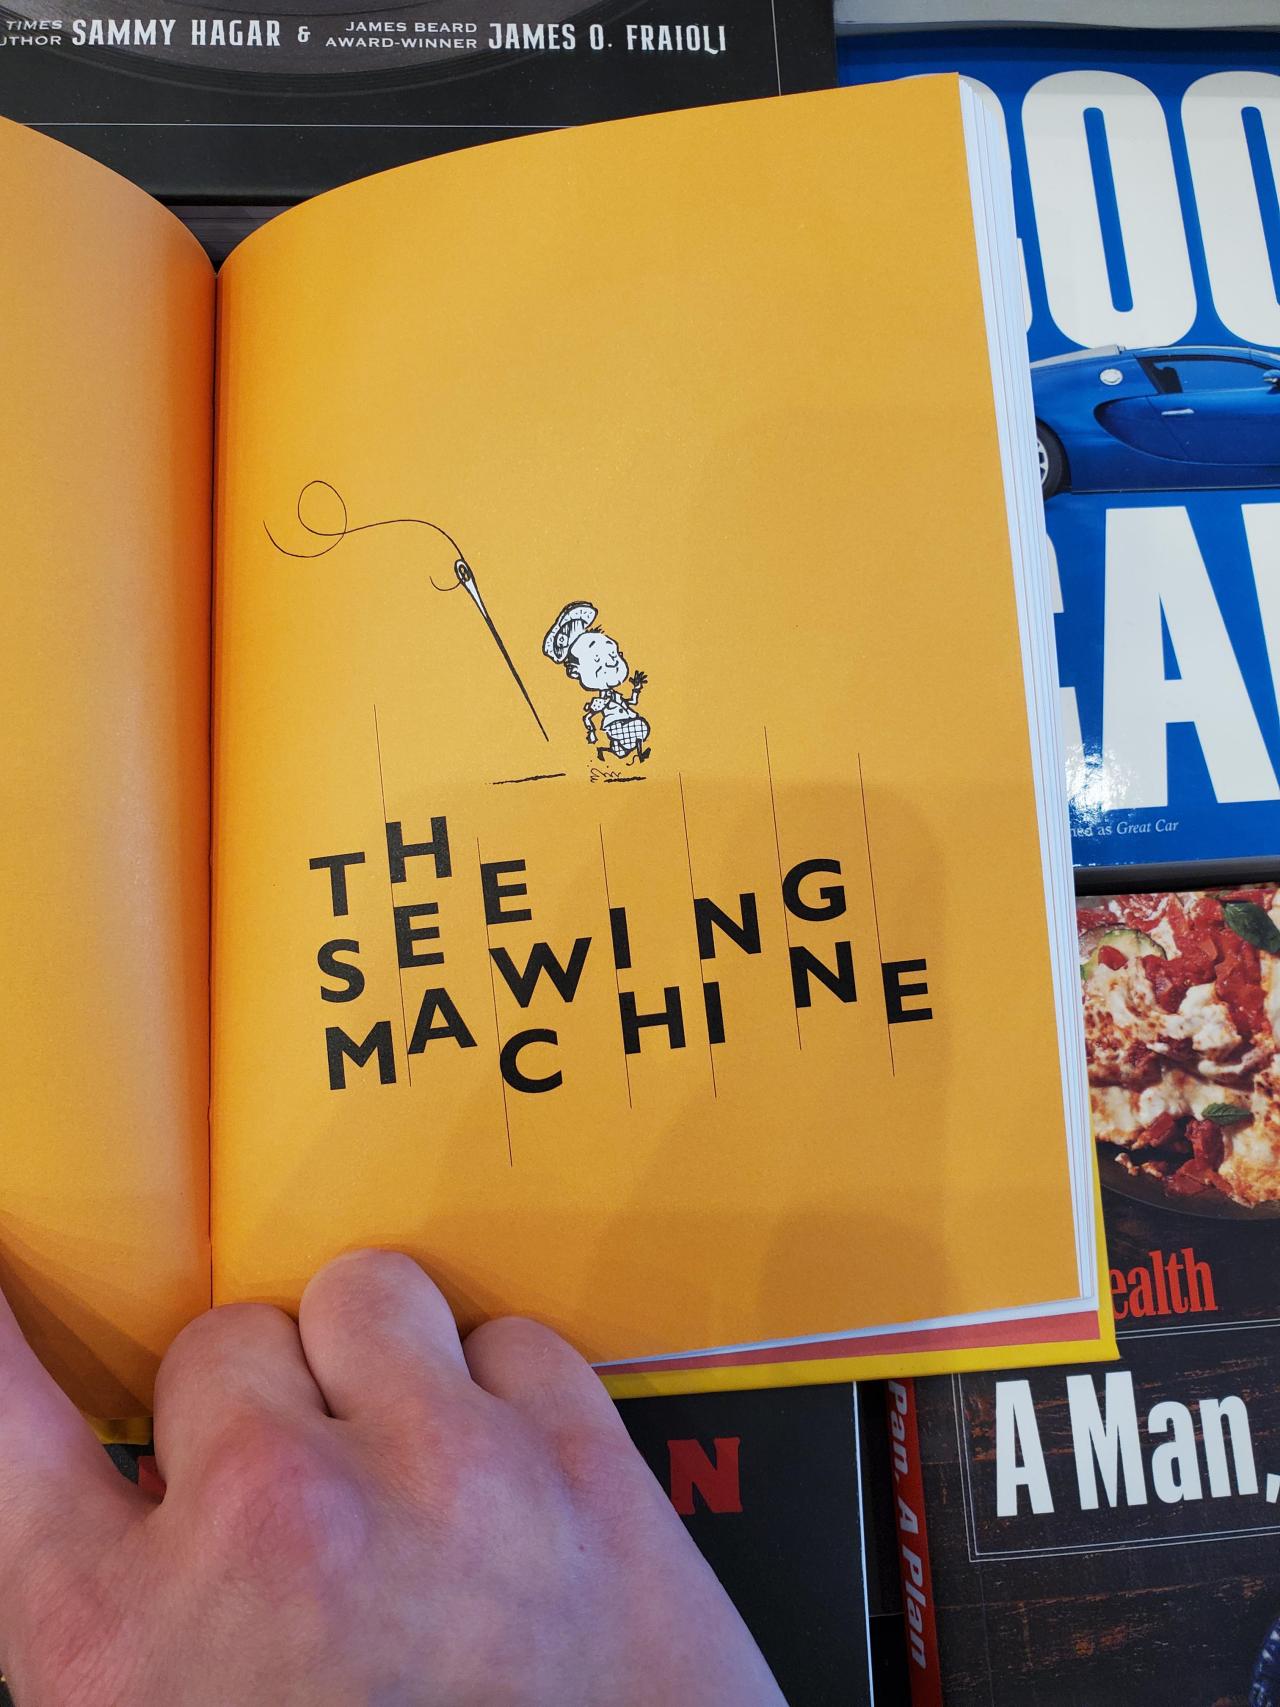 th see mawing chine, found at your local barnes and noble Source: CrappyDesign #design#LOL#funny